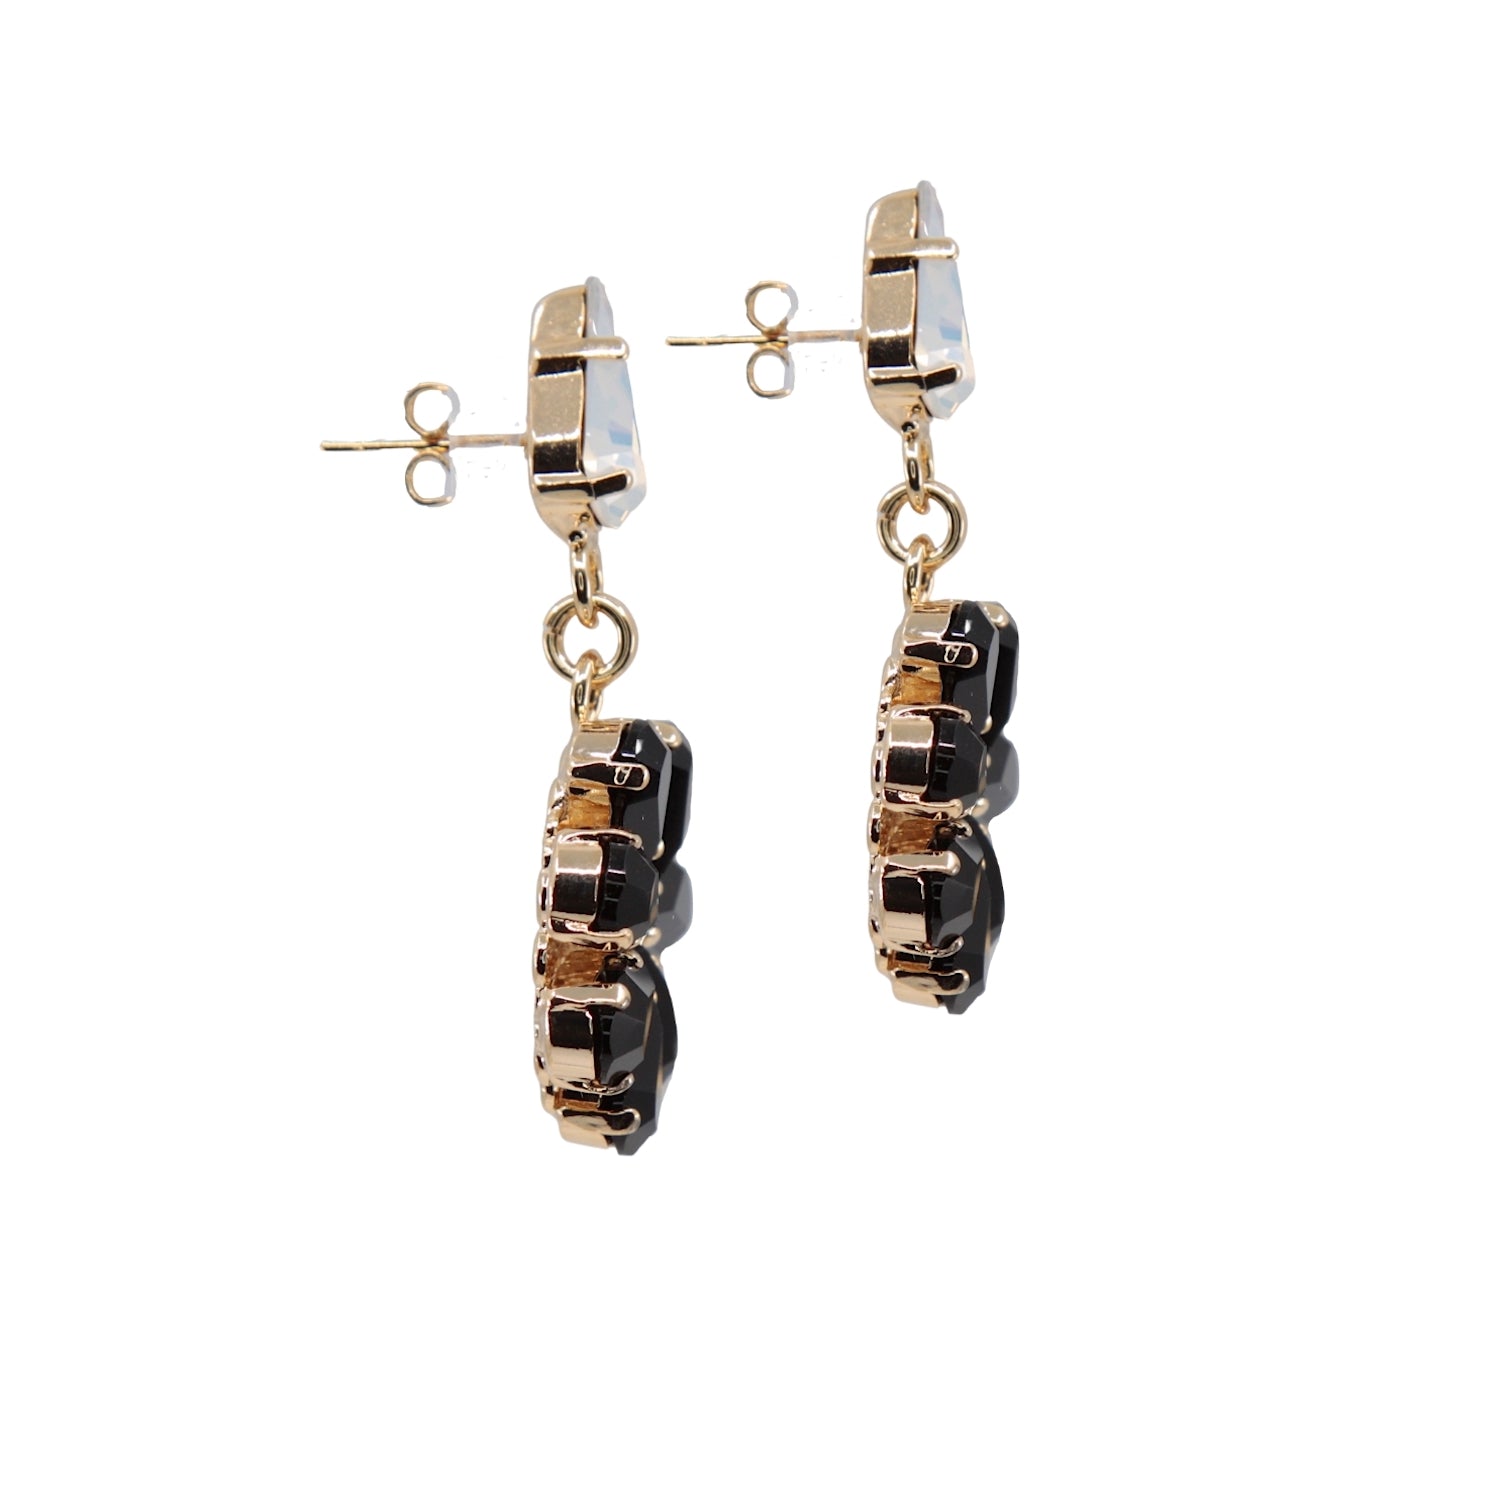 Daisy Pendant Earrings With Crystal Drops In Onyx And Opal Shades.